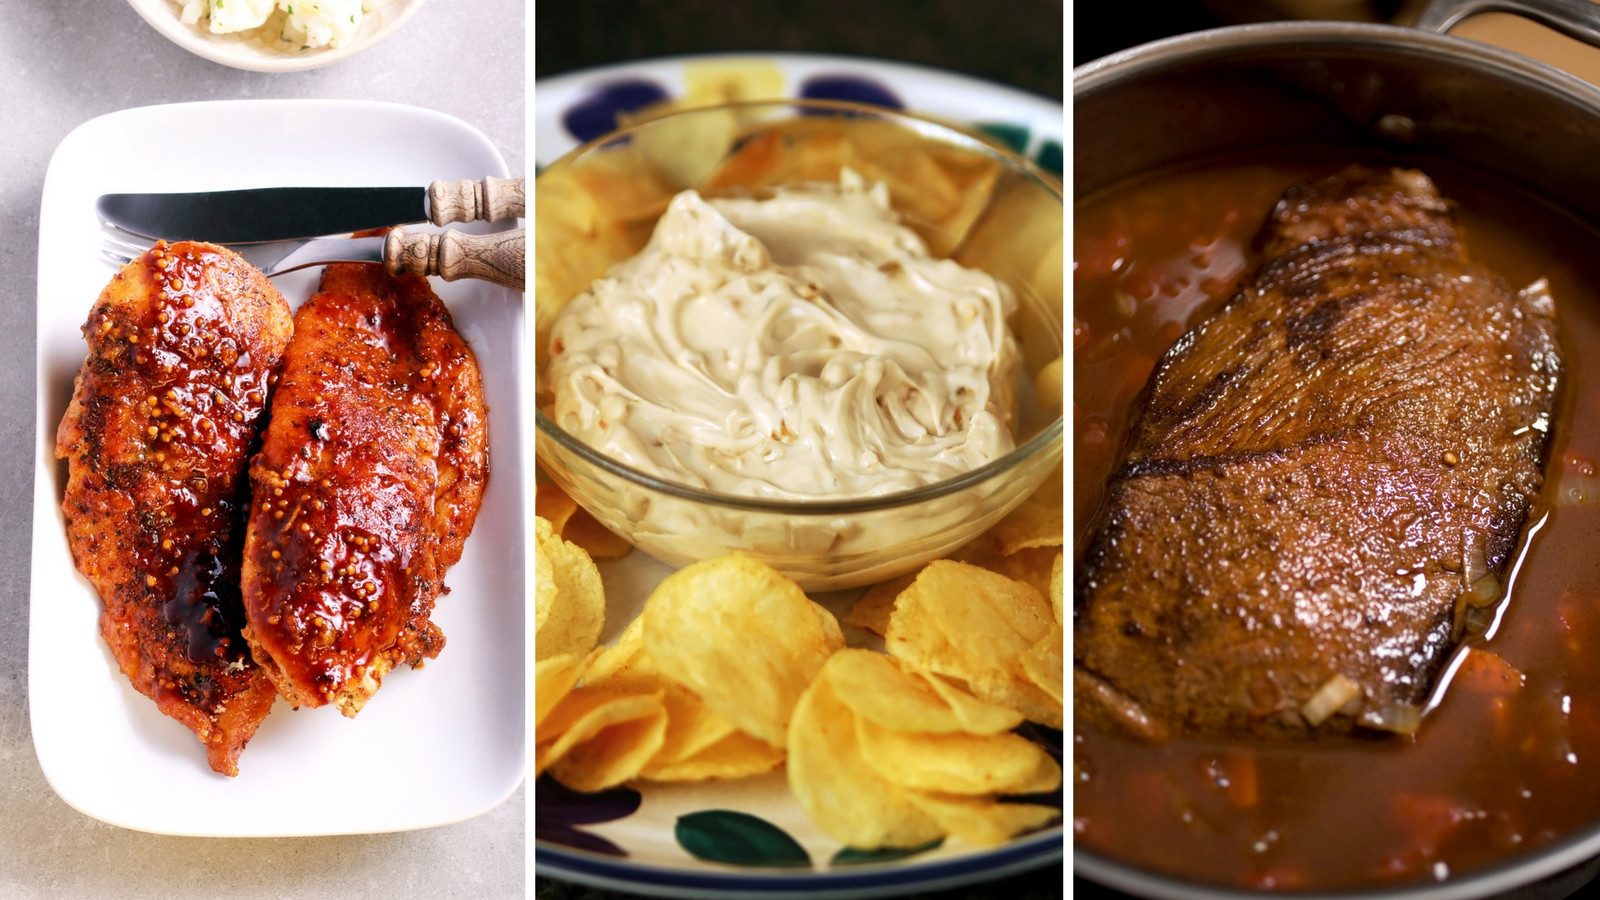 Passover Brisket Recipe Onion Soup Mix
 9 Ways to Use ion Soup Mix That Will Remind You of Your